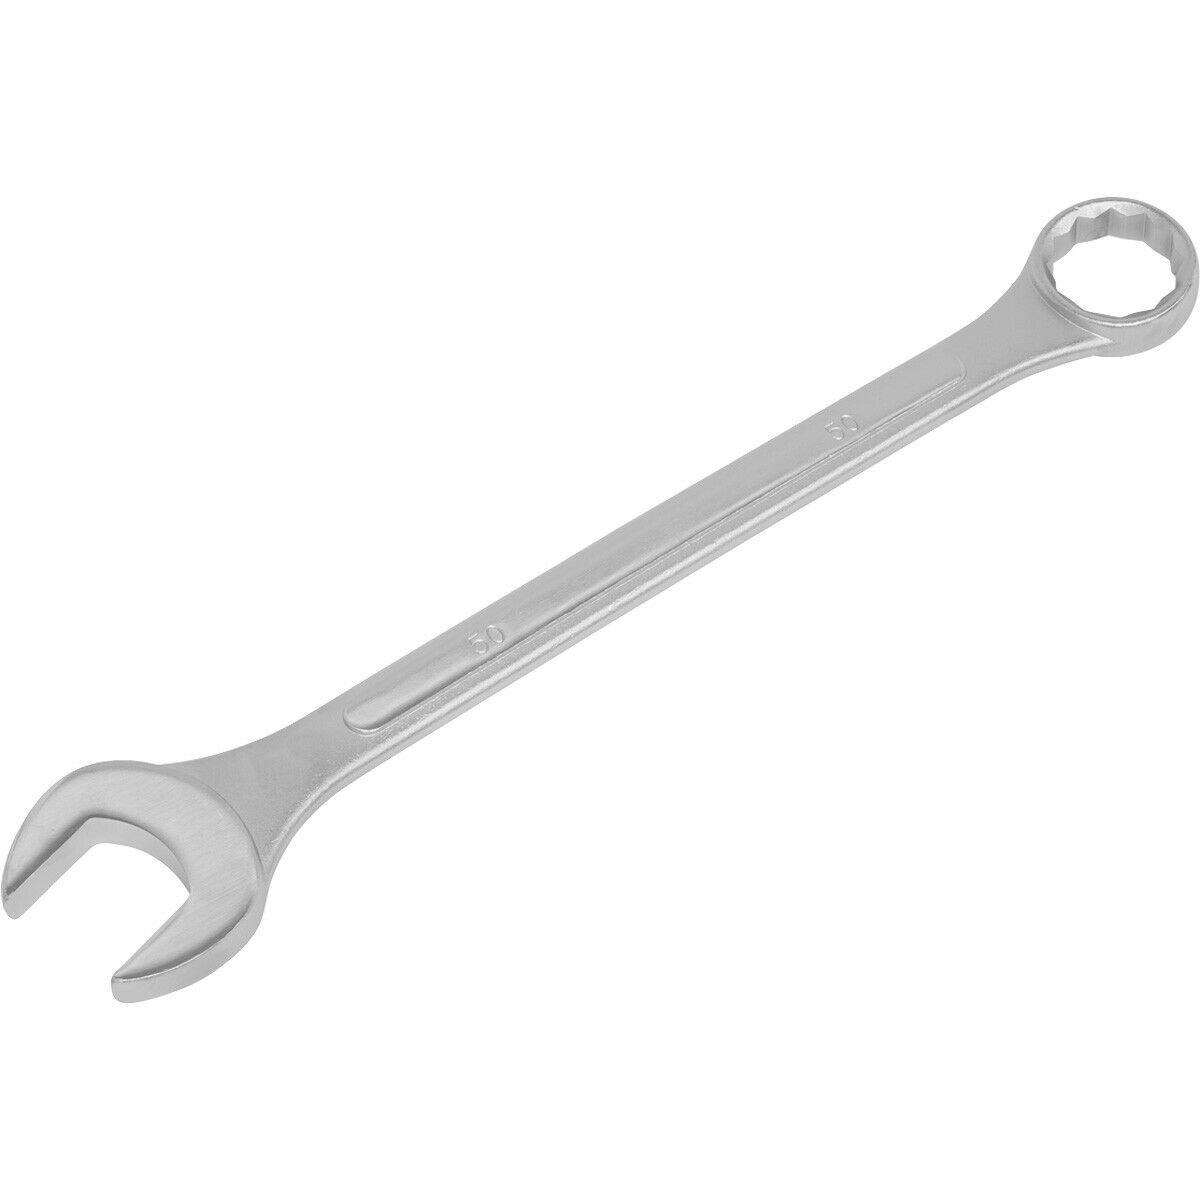 50mm Large Combination Spanner - Drop Forged Steel - Chrome Plated Polished Jaws